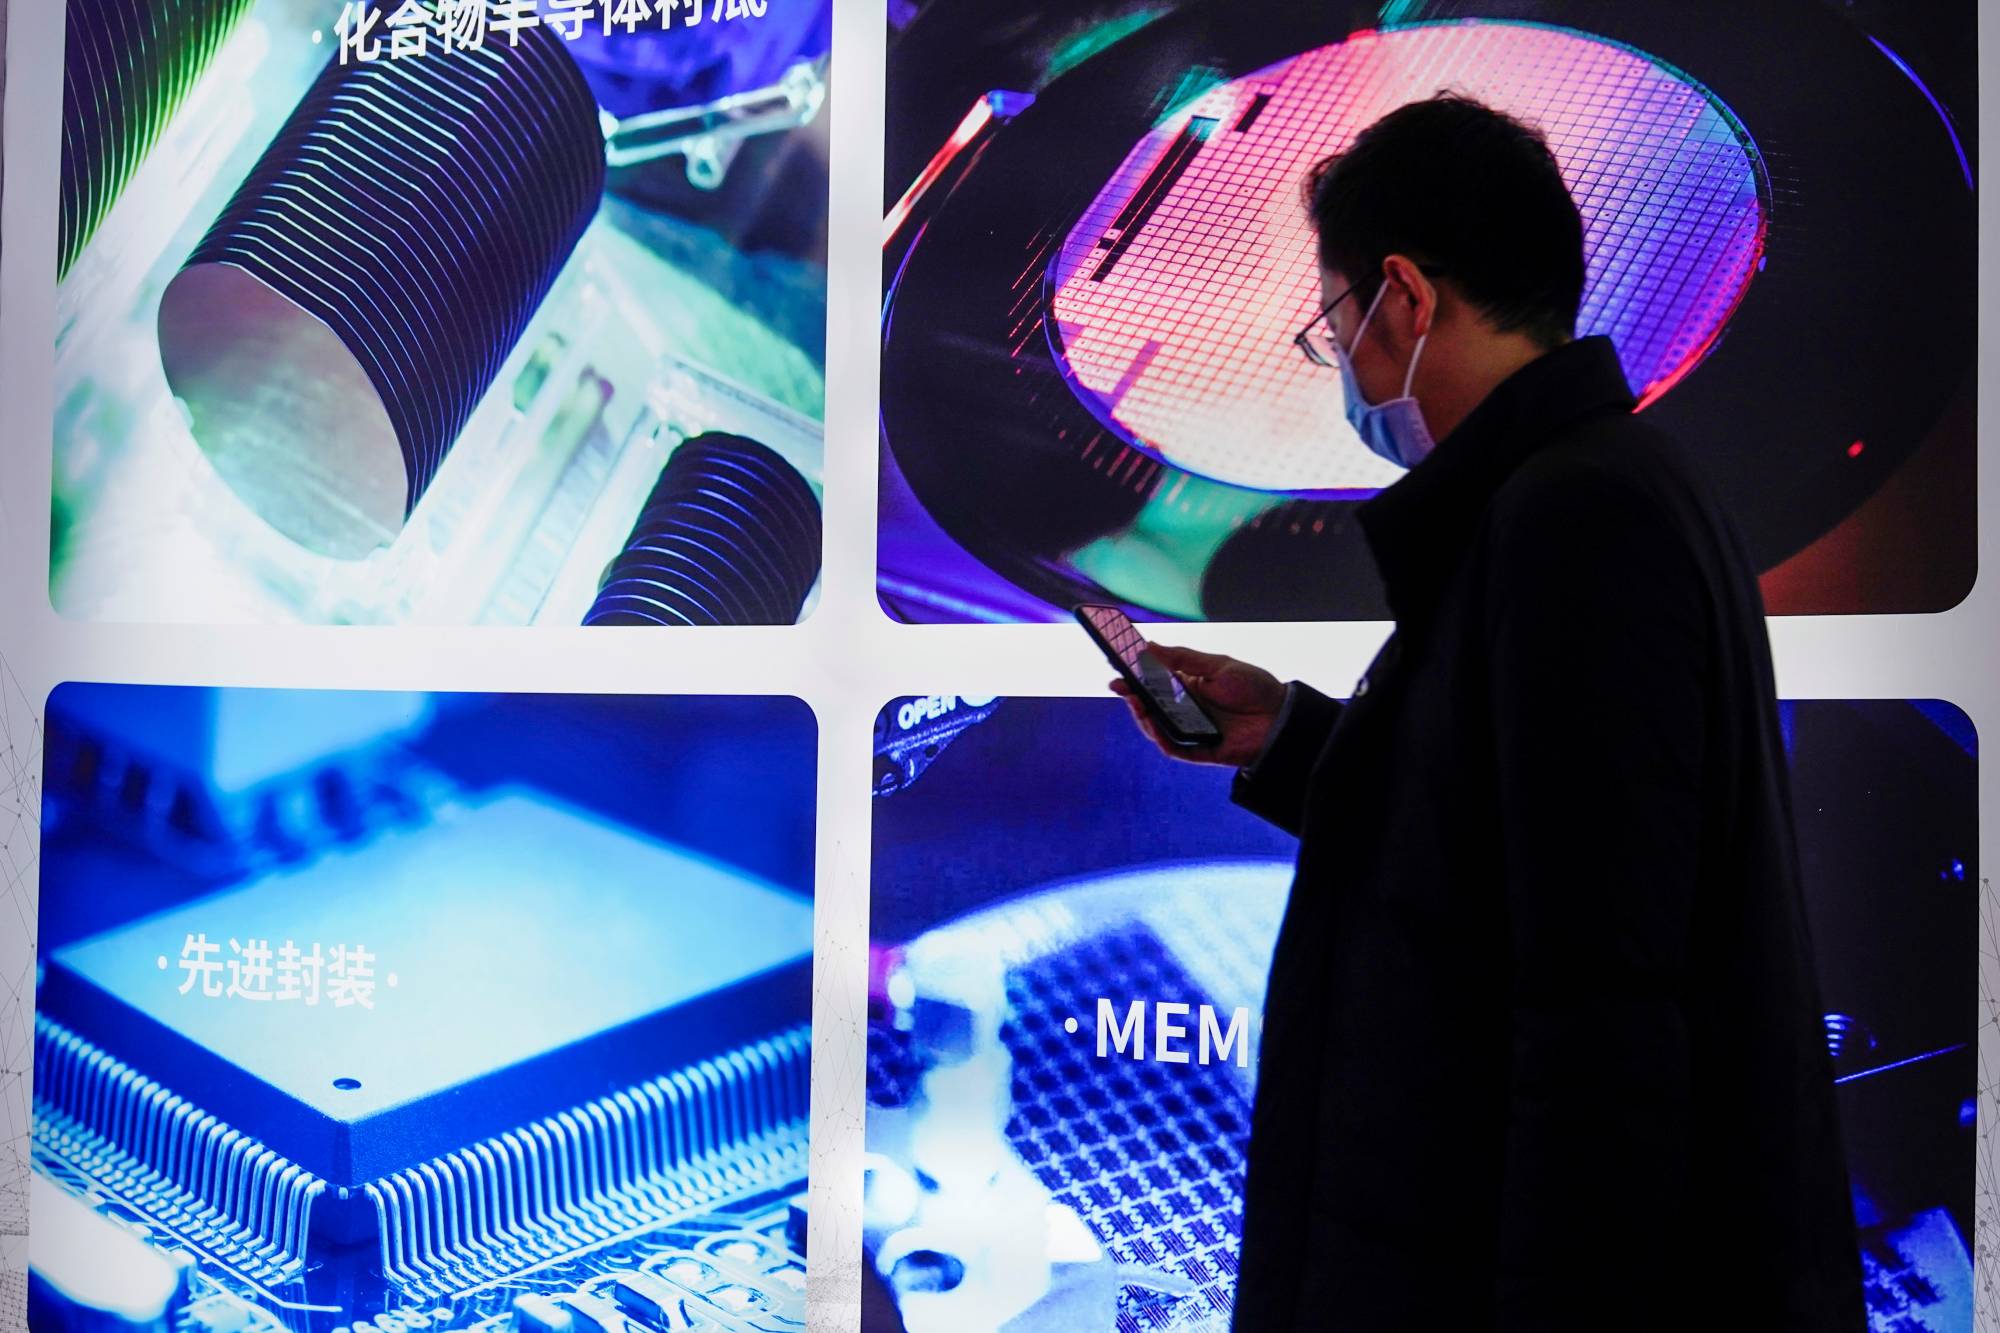 A man visits a display of semiconductor devices at Semicon China, a trade fair for semiconductor technology, in Shanghai in March 2021. | REUTERS